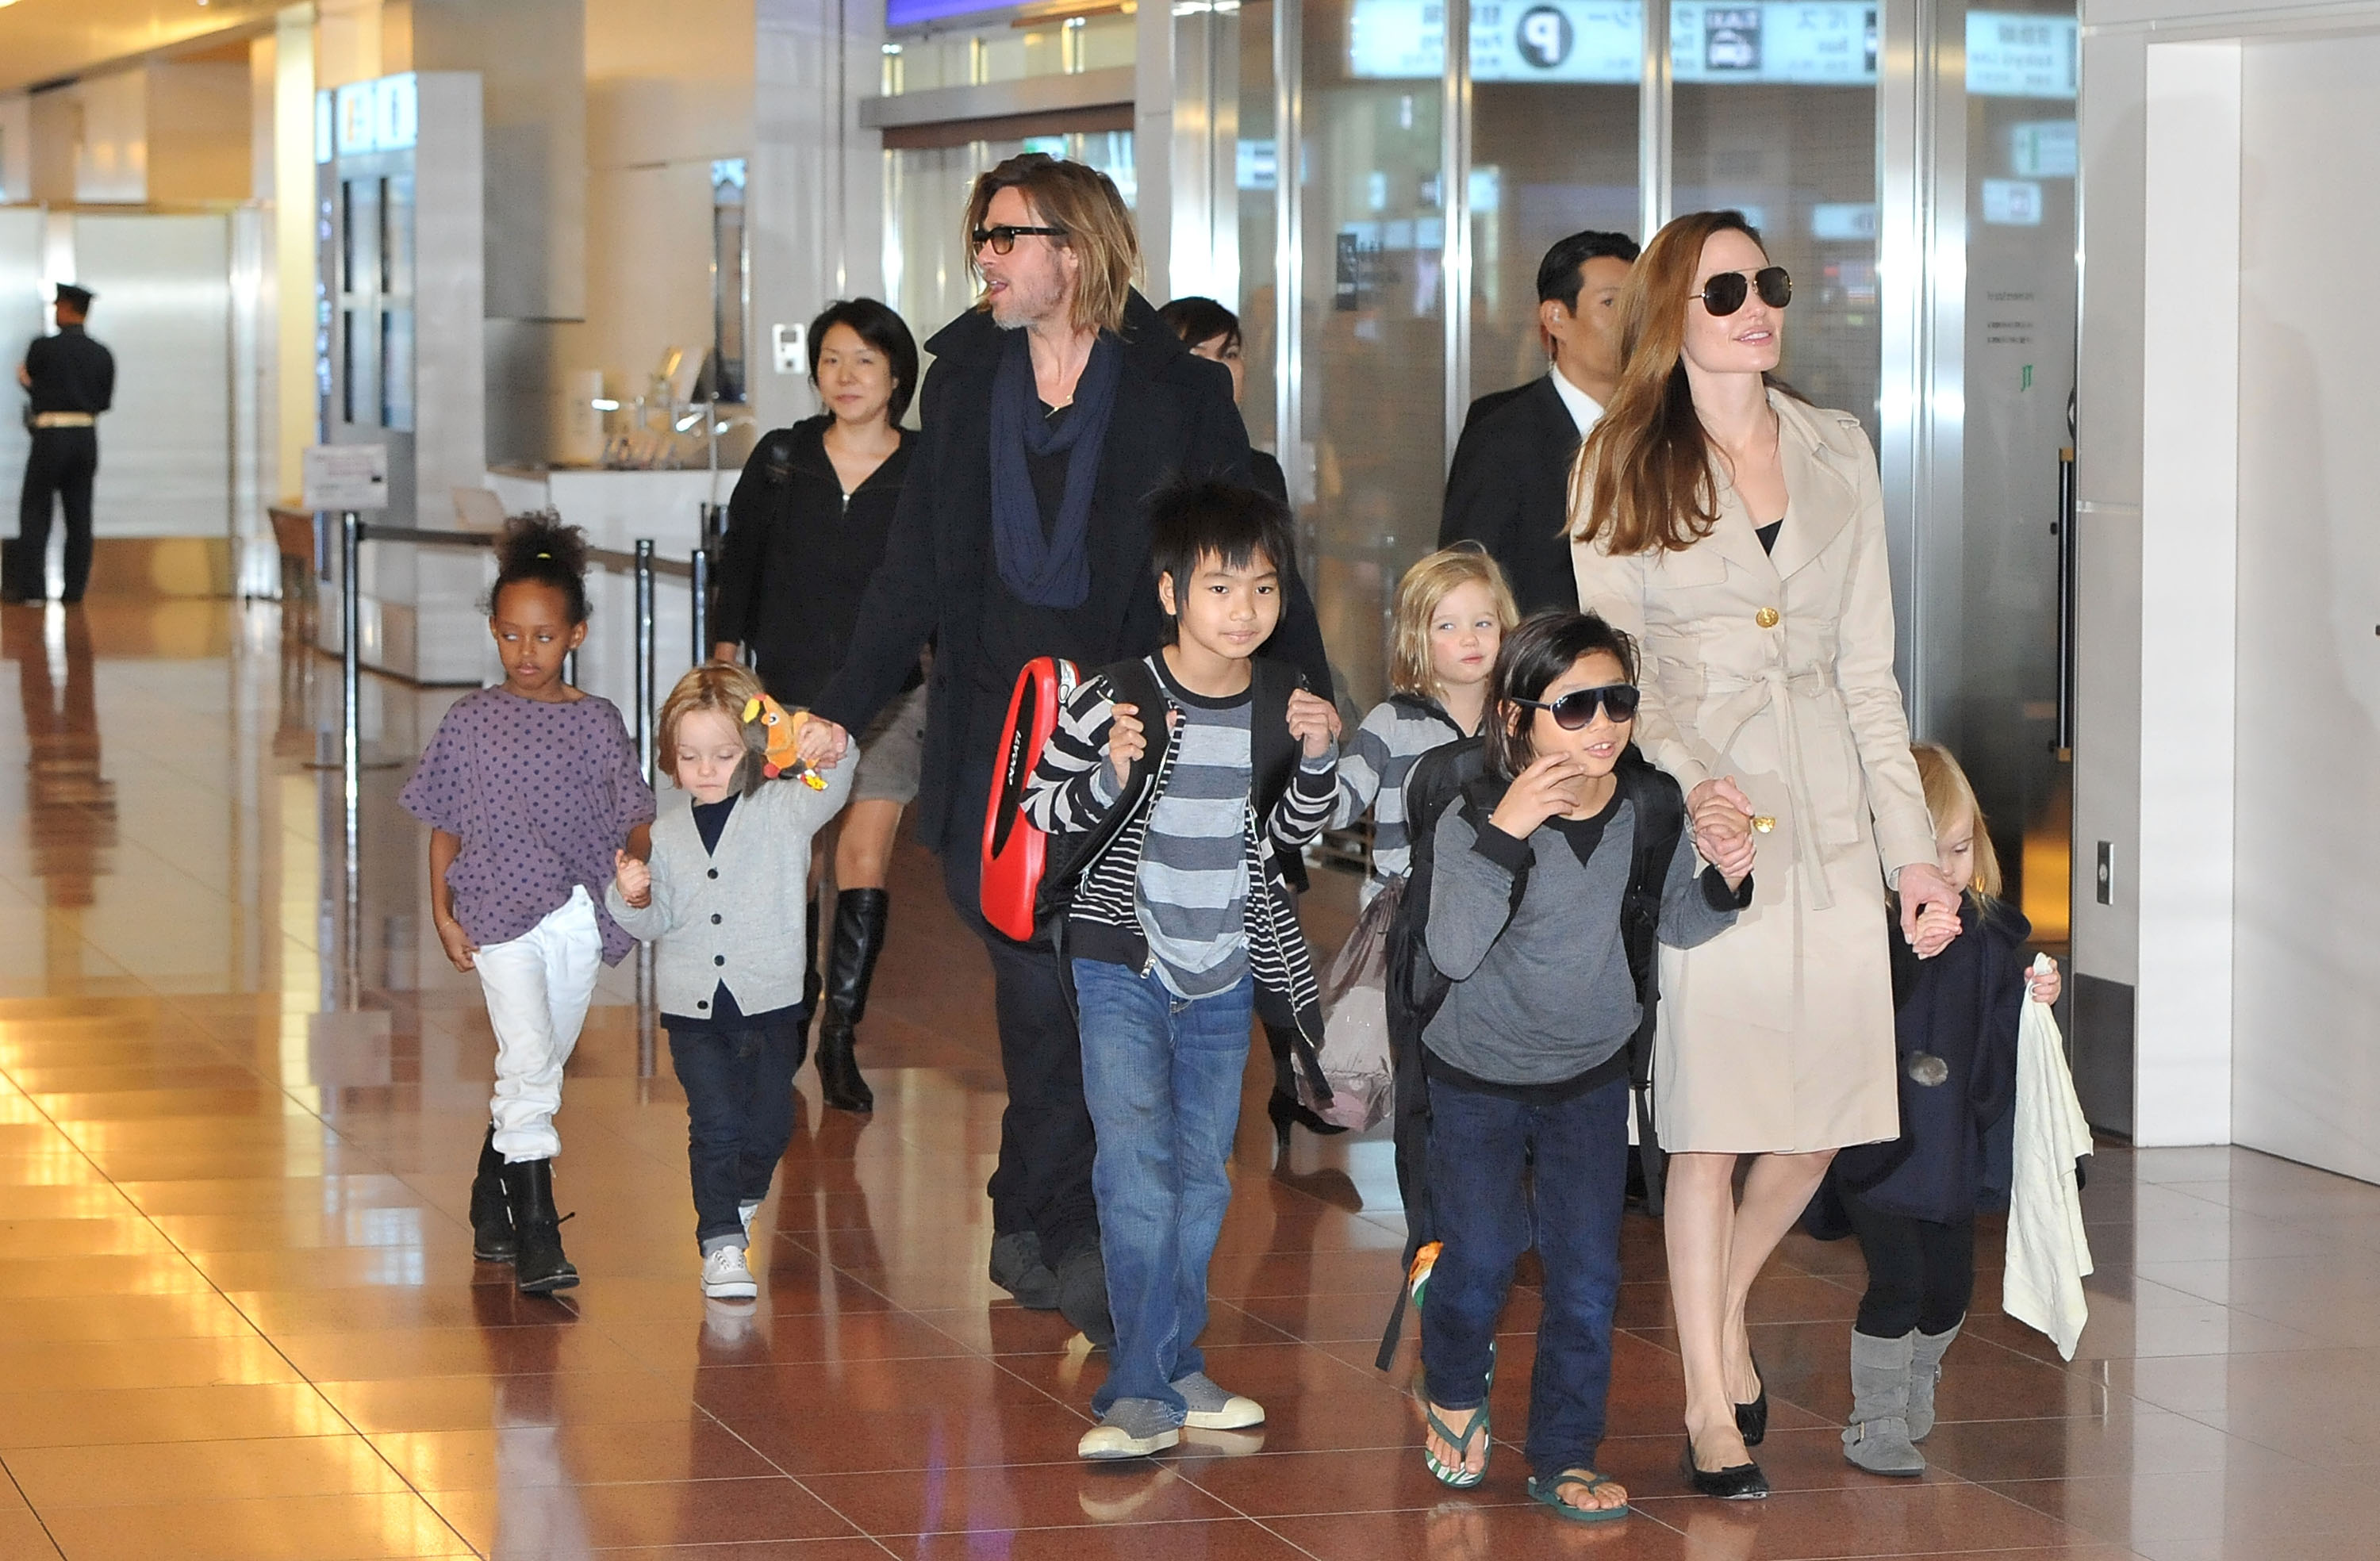 Angelina Jolie, Brad Pitt and their children Maddox, Pax, Zahara, Shiloh, Knox, and Vivienne arrive at Haneda International Airport on November 8 in Tokyo, Japan | Source: Getty Images